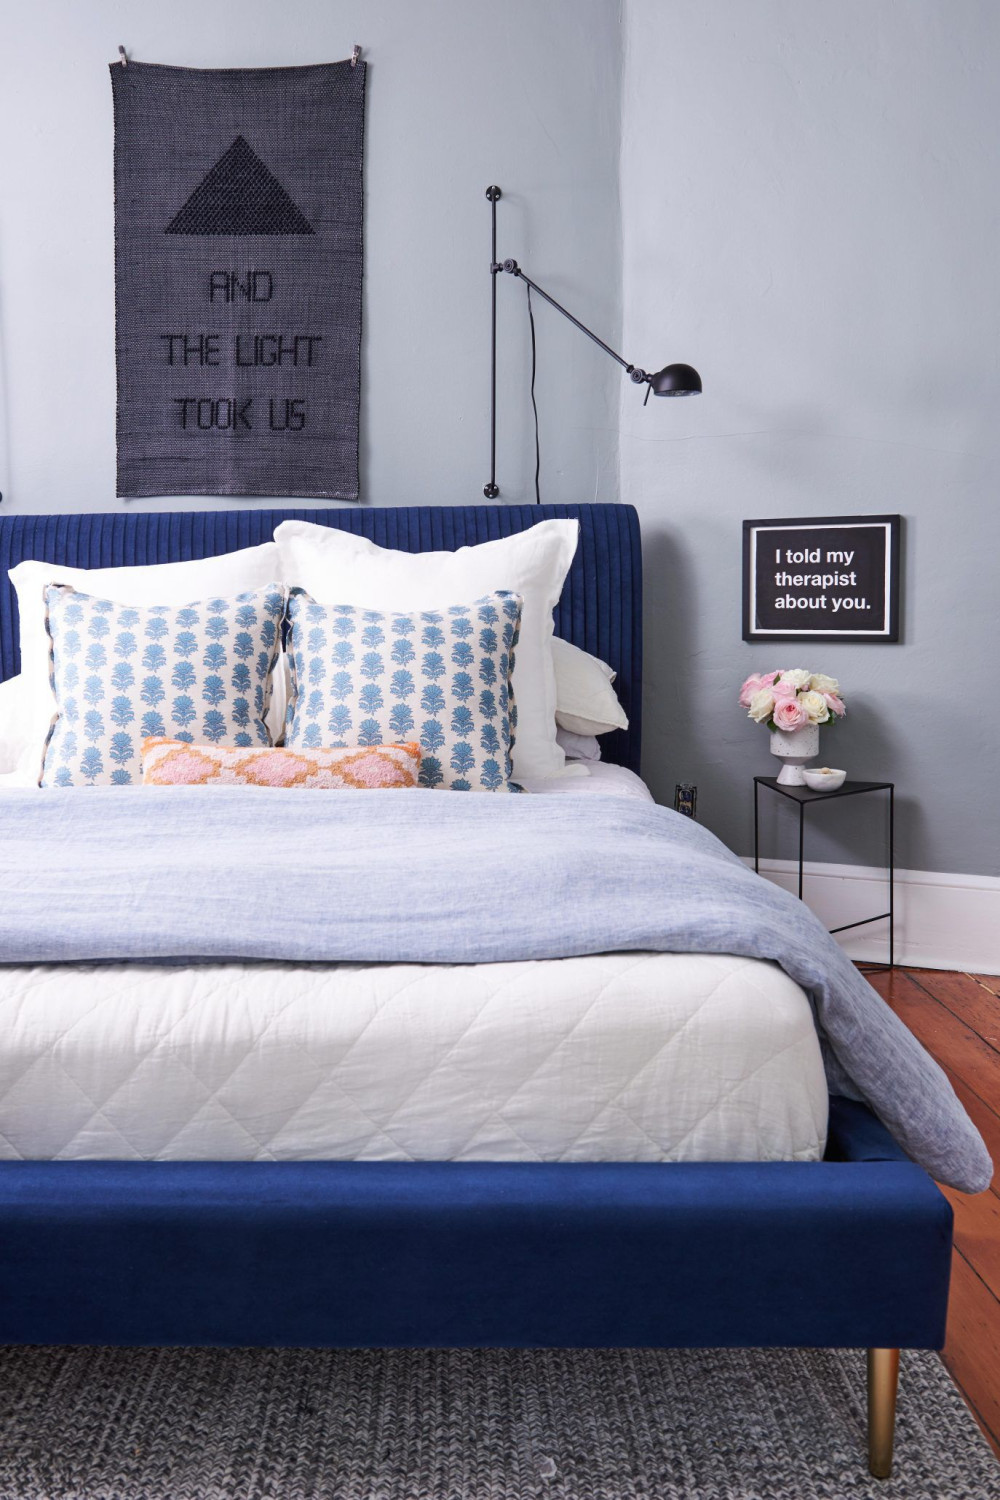 Calm Bedroom Paint Colors That Will Soothe You to Sleep